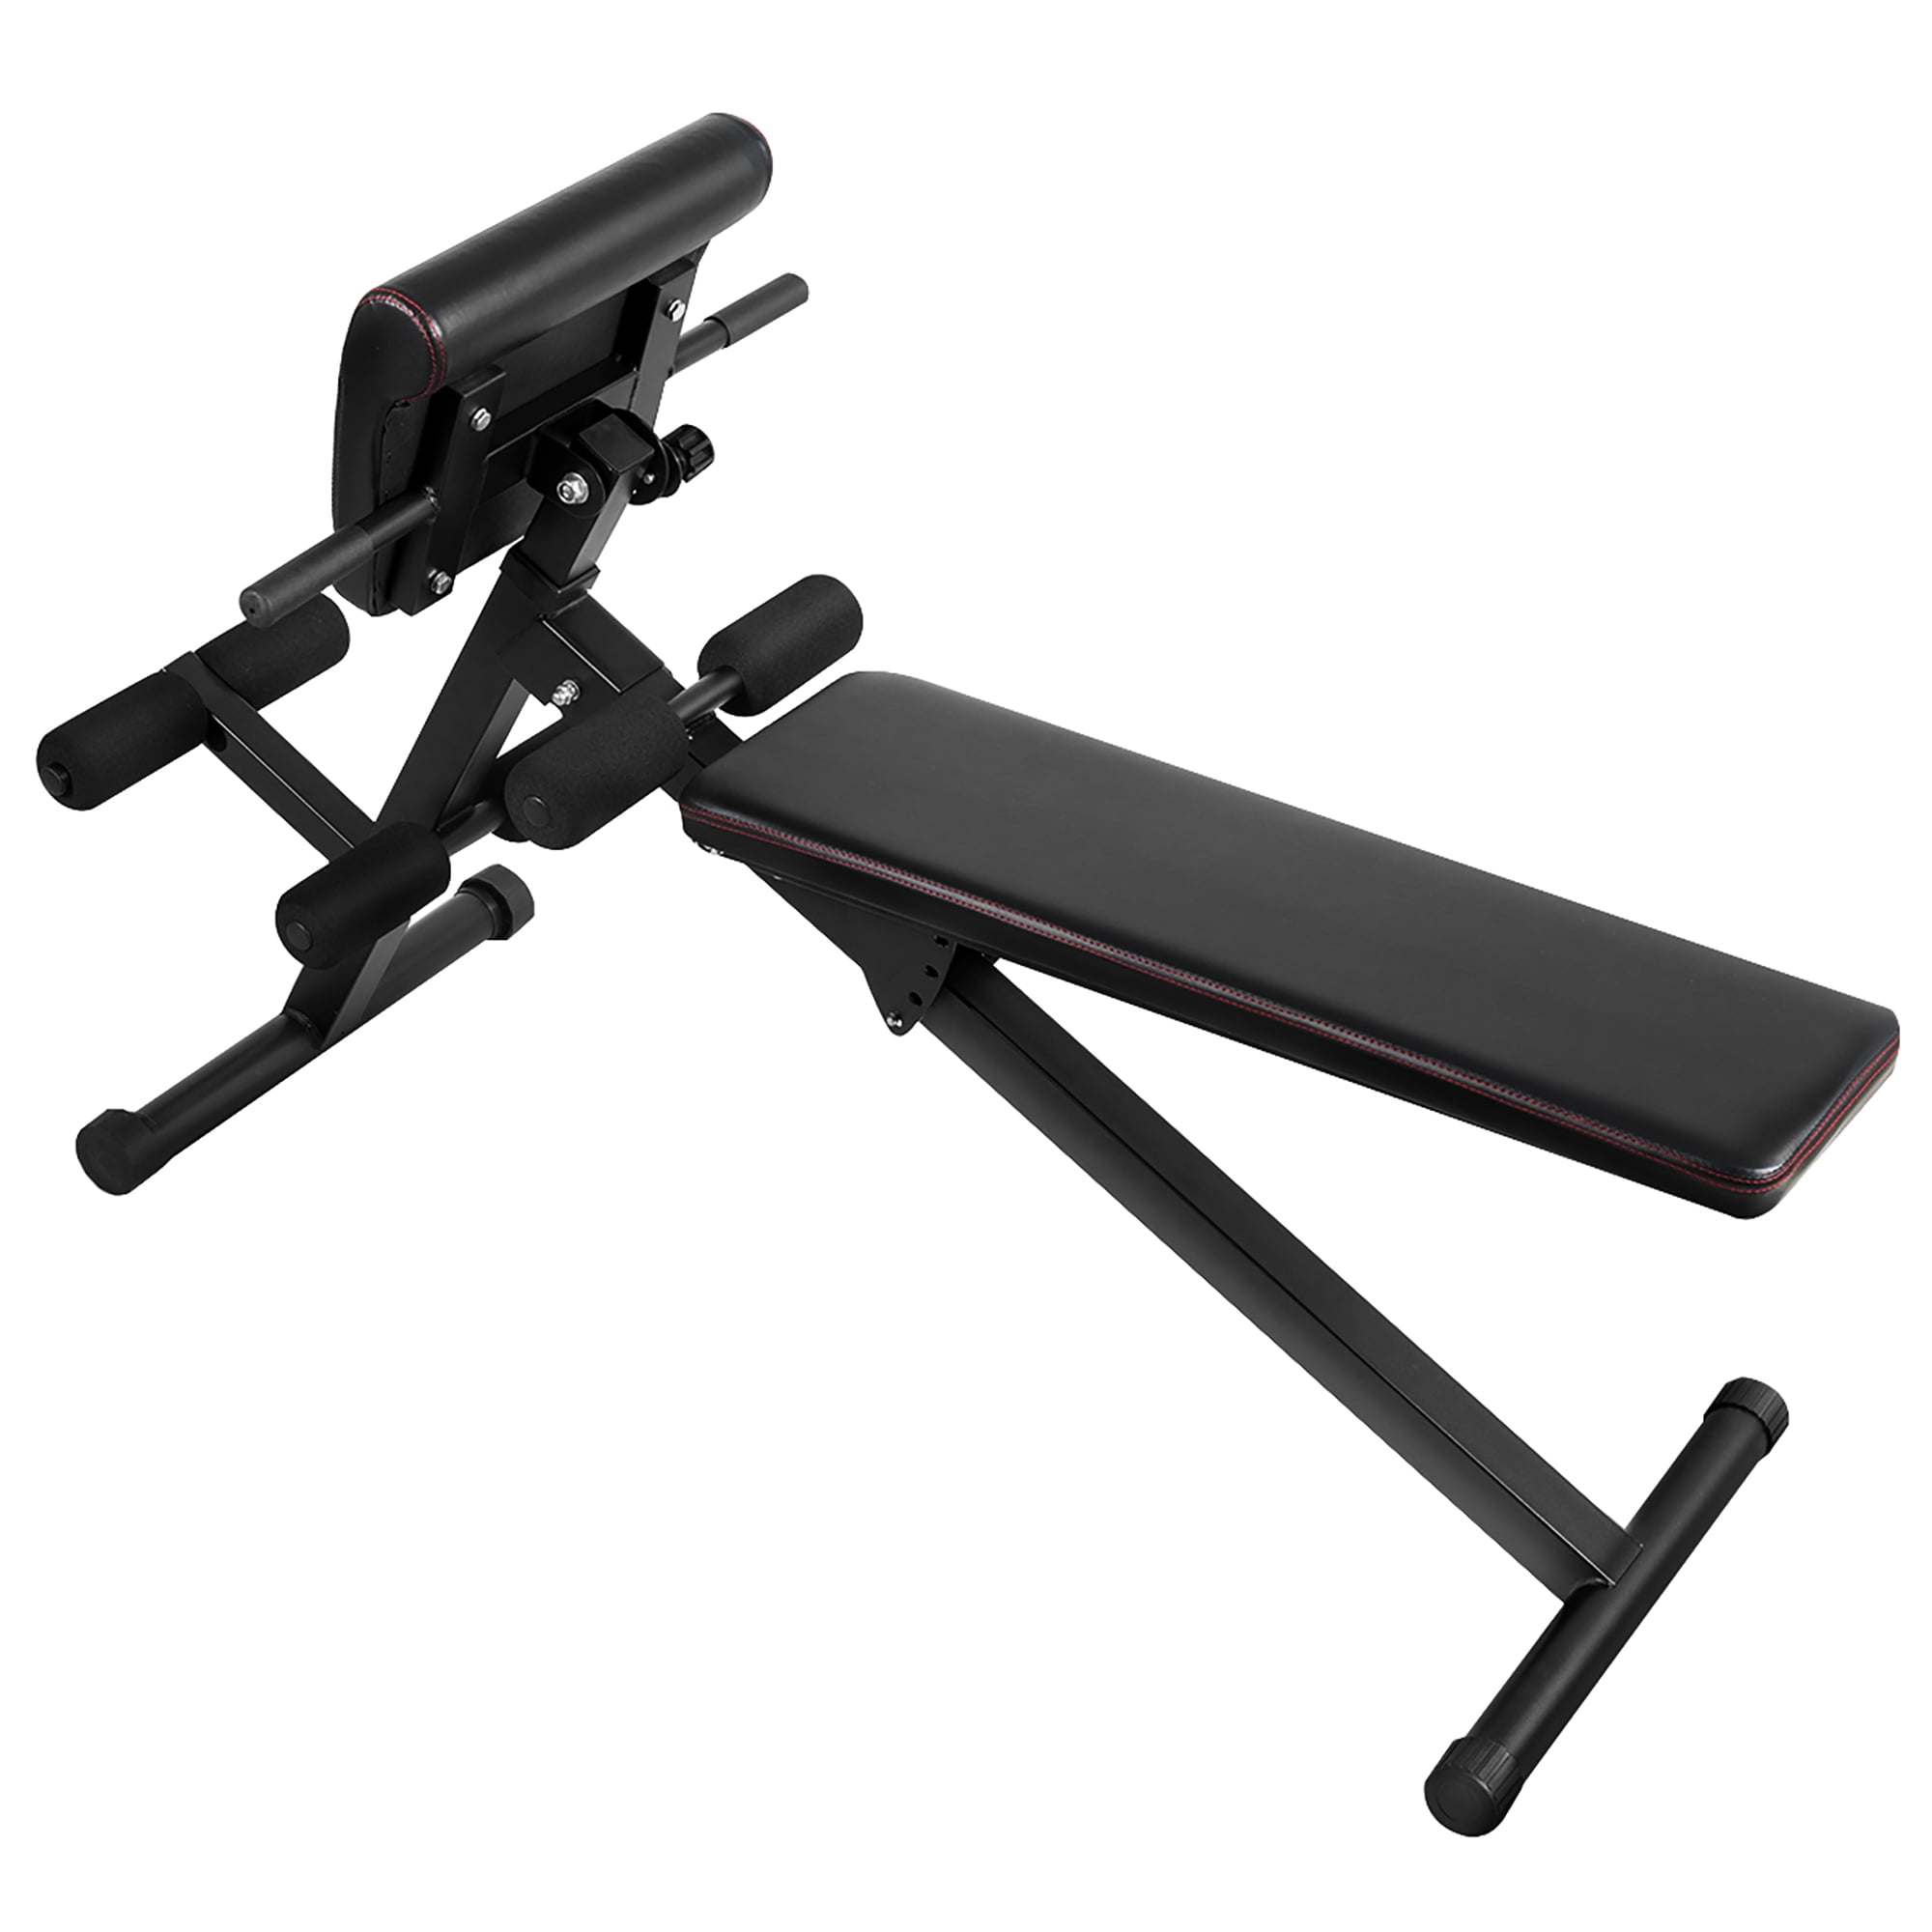  SpoxFit Adjustable Weight Bench, Full Body Workout